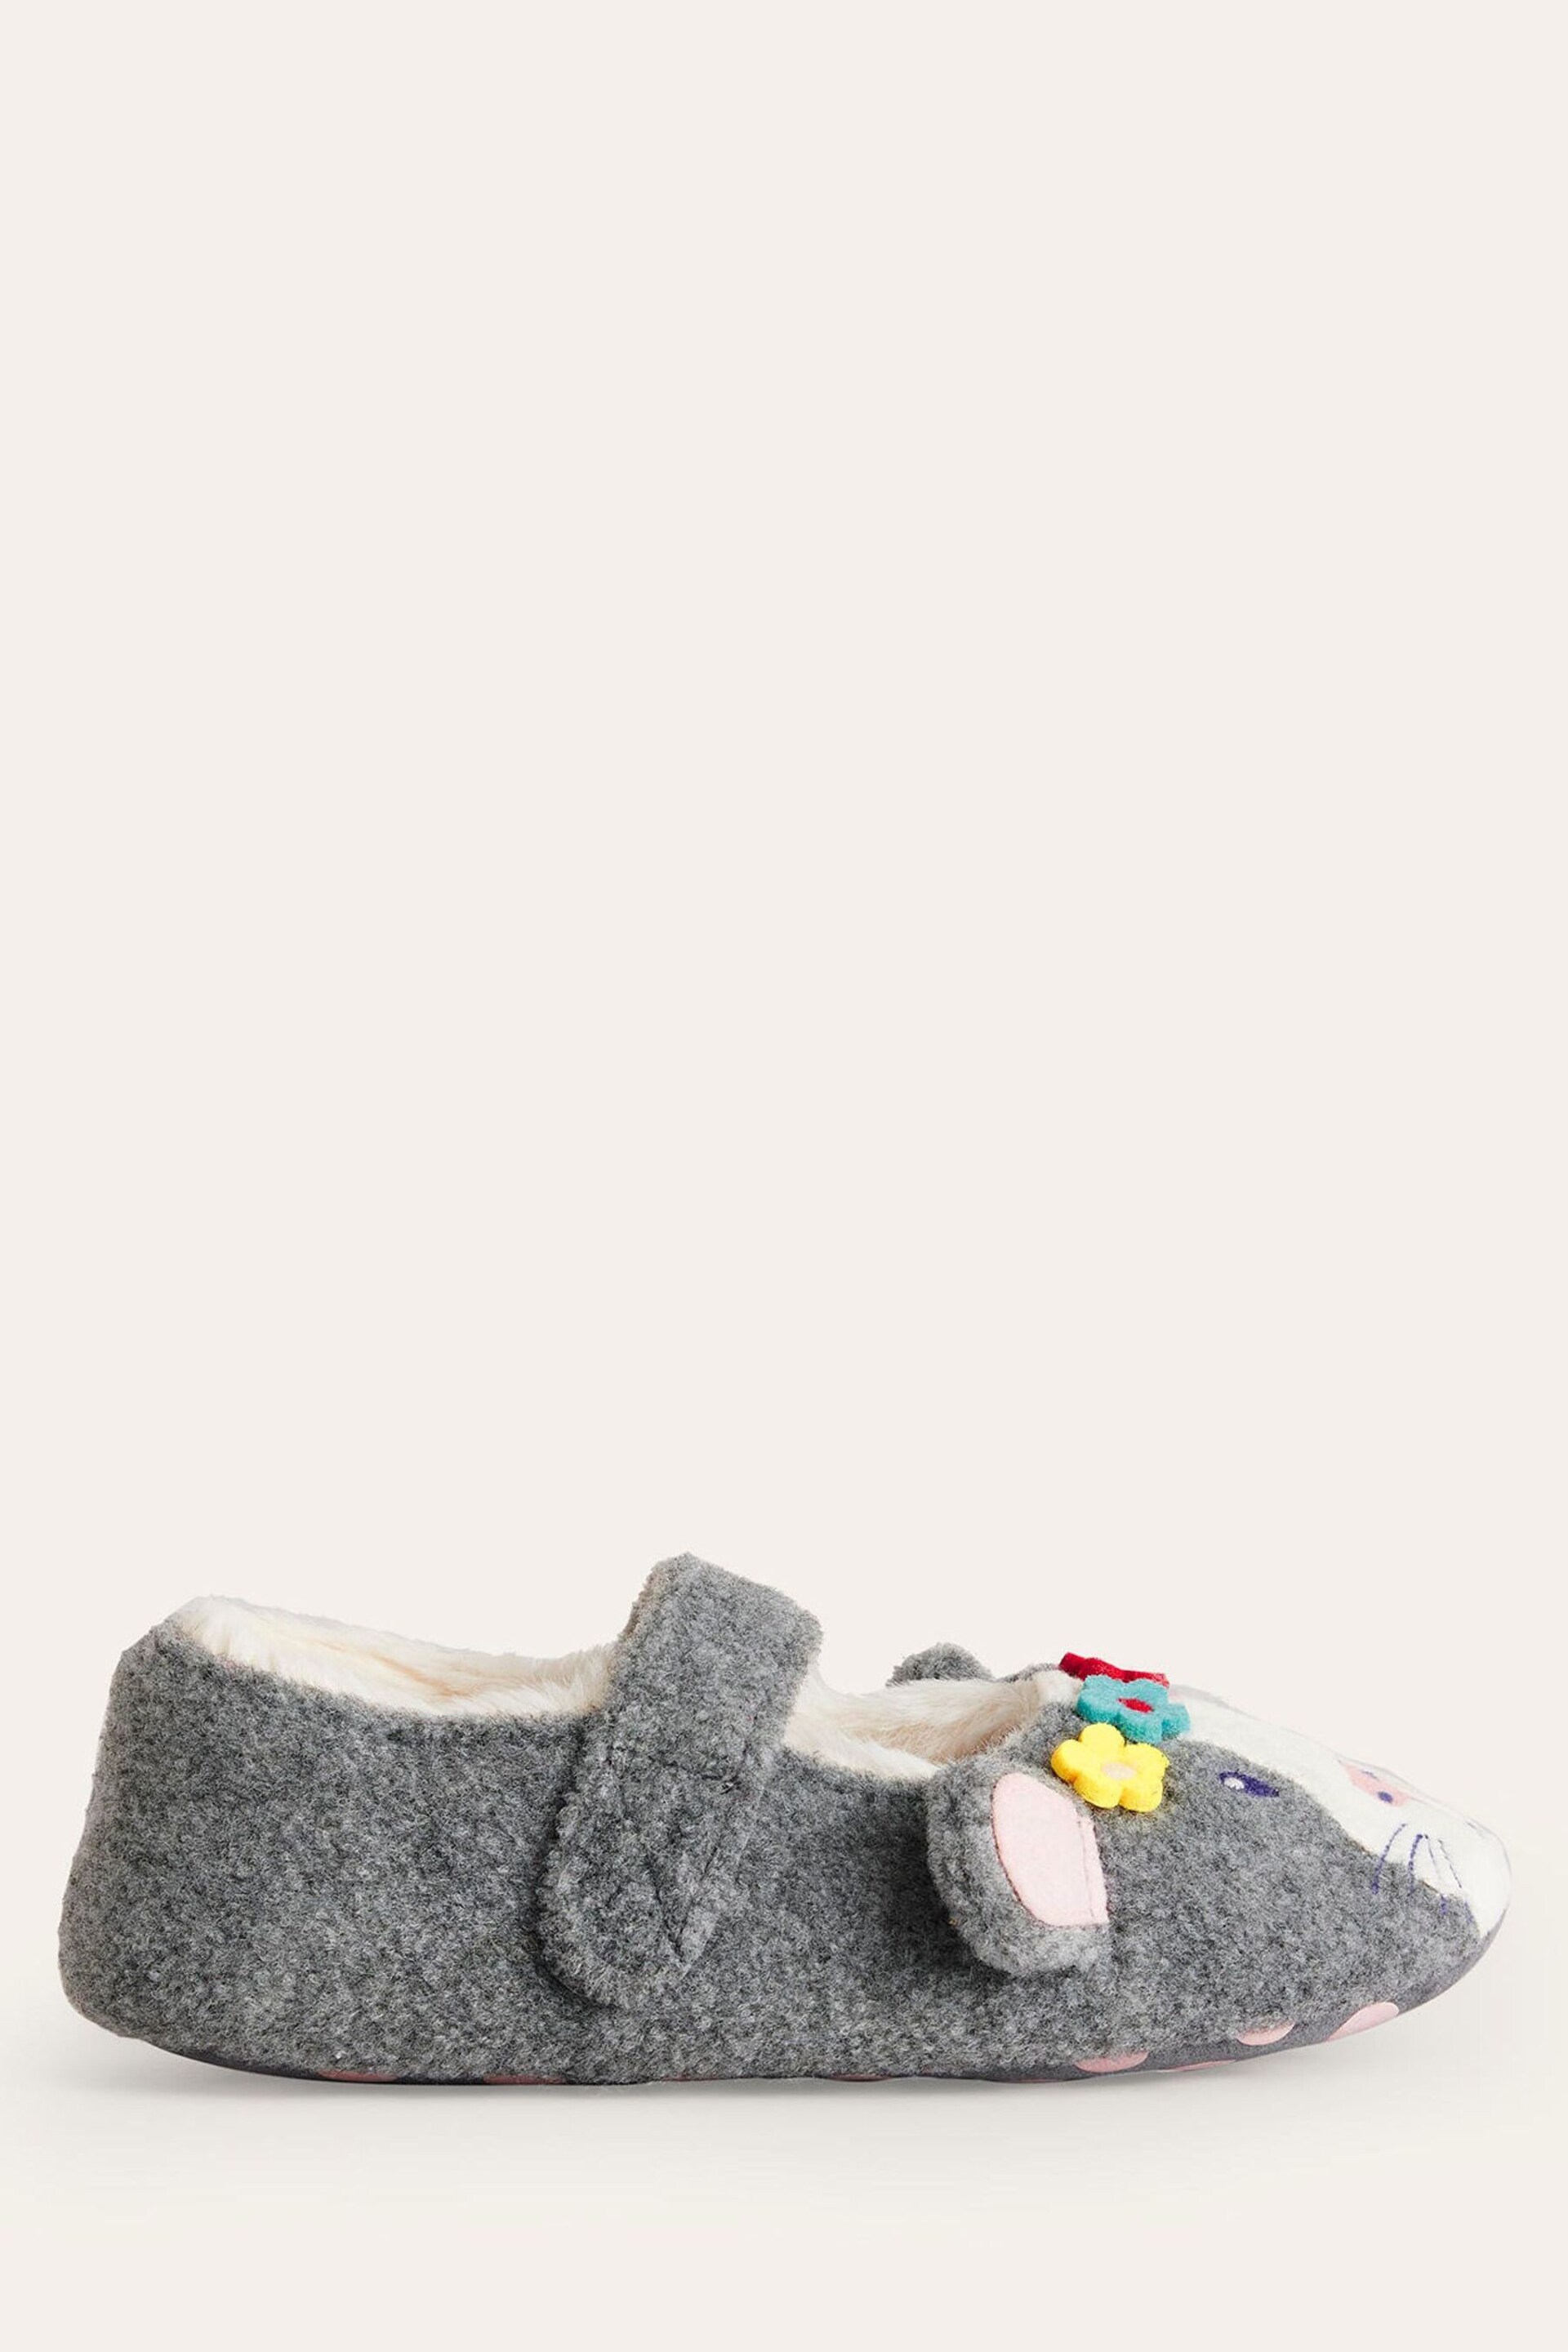 Boden Grey Guinea Pig Slippers - Image 2 of 3